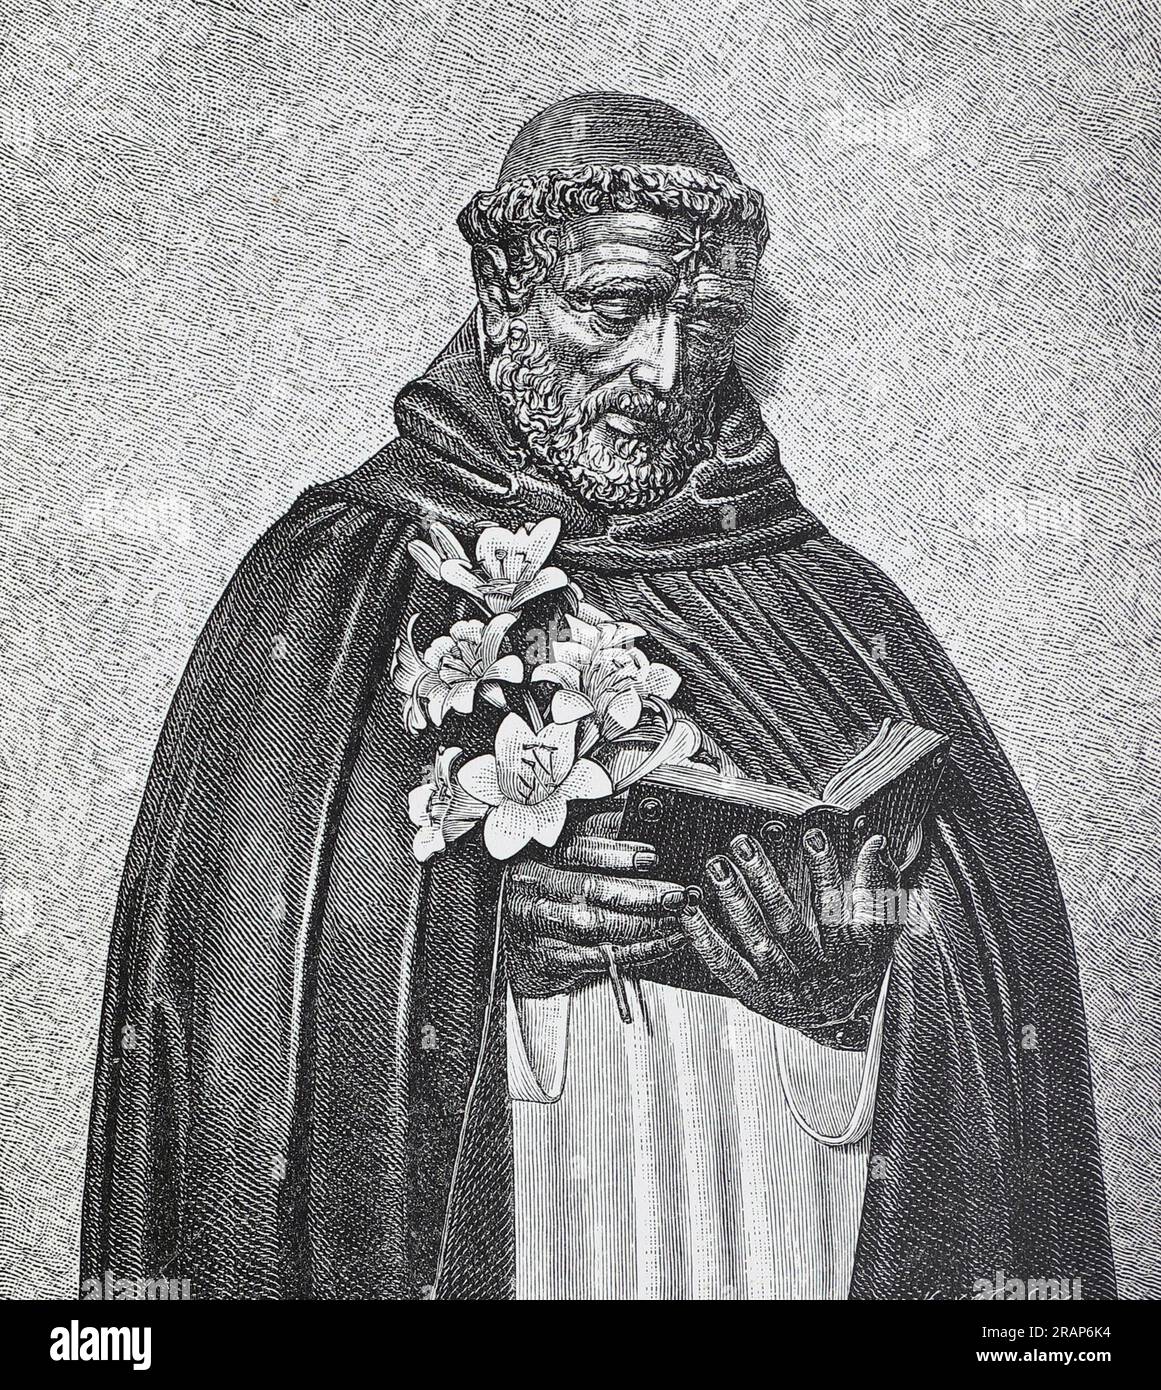 Portrait of Saint Dominic. Engraving from Lives of the Saints by Sabin Baring-Gould. Stock Photo